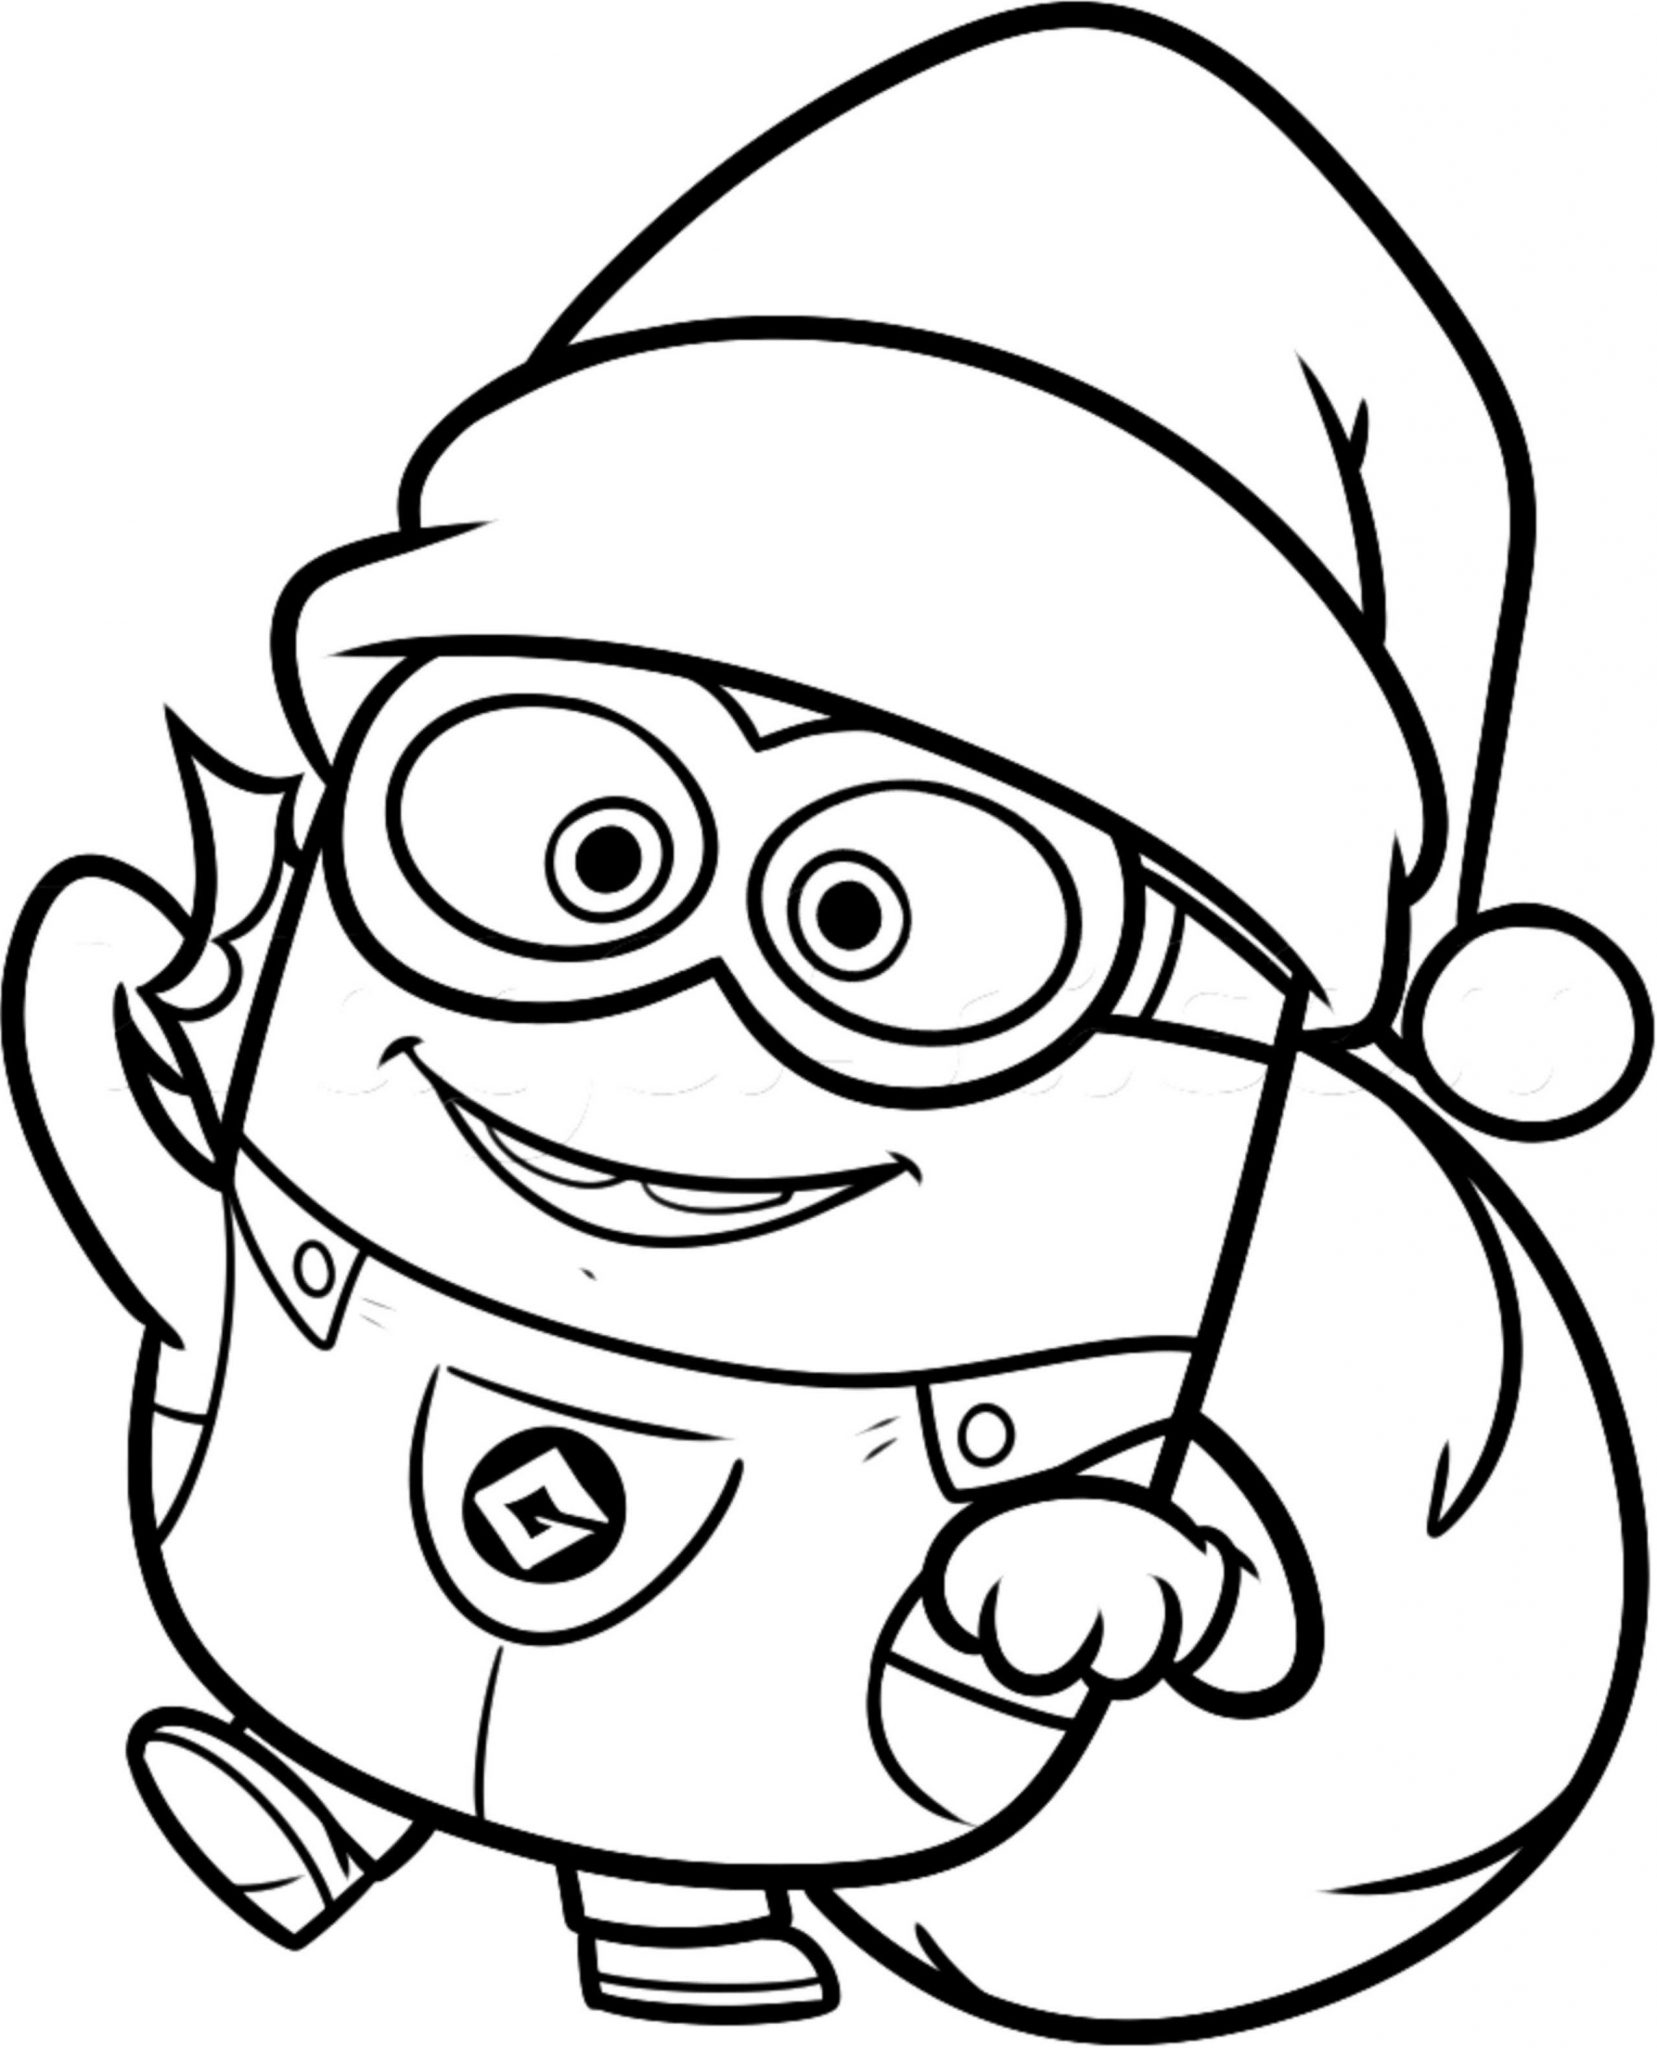 Print & Download   Minion Coloring Pages for Kids to Have ...